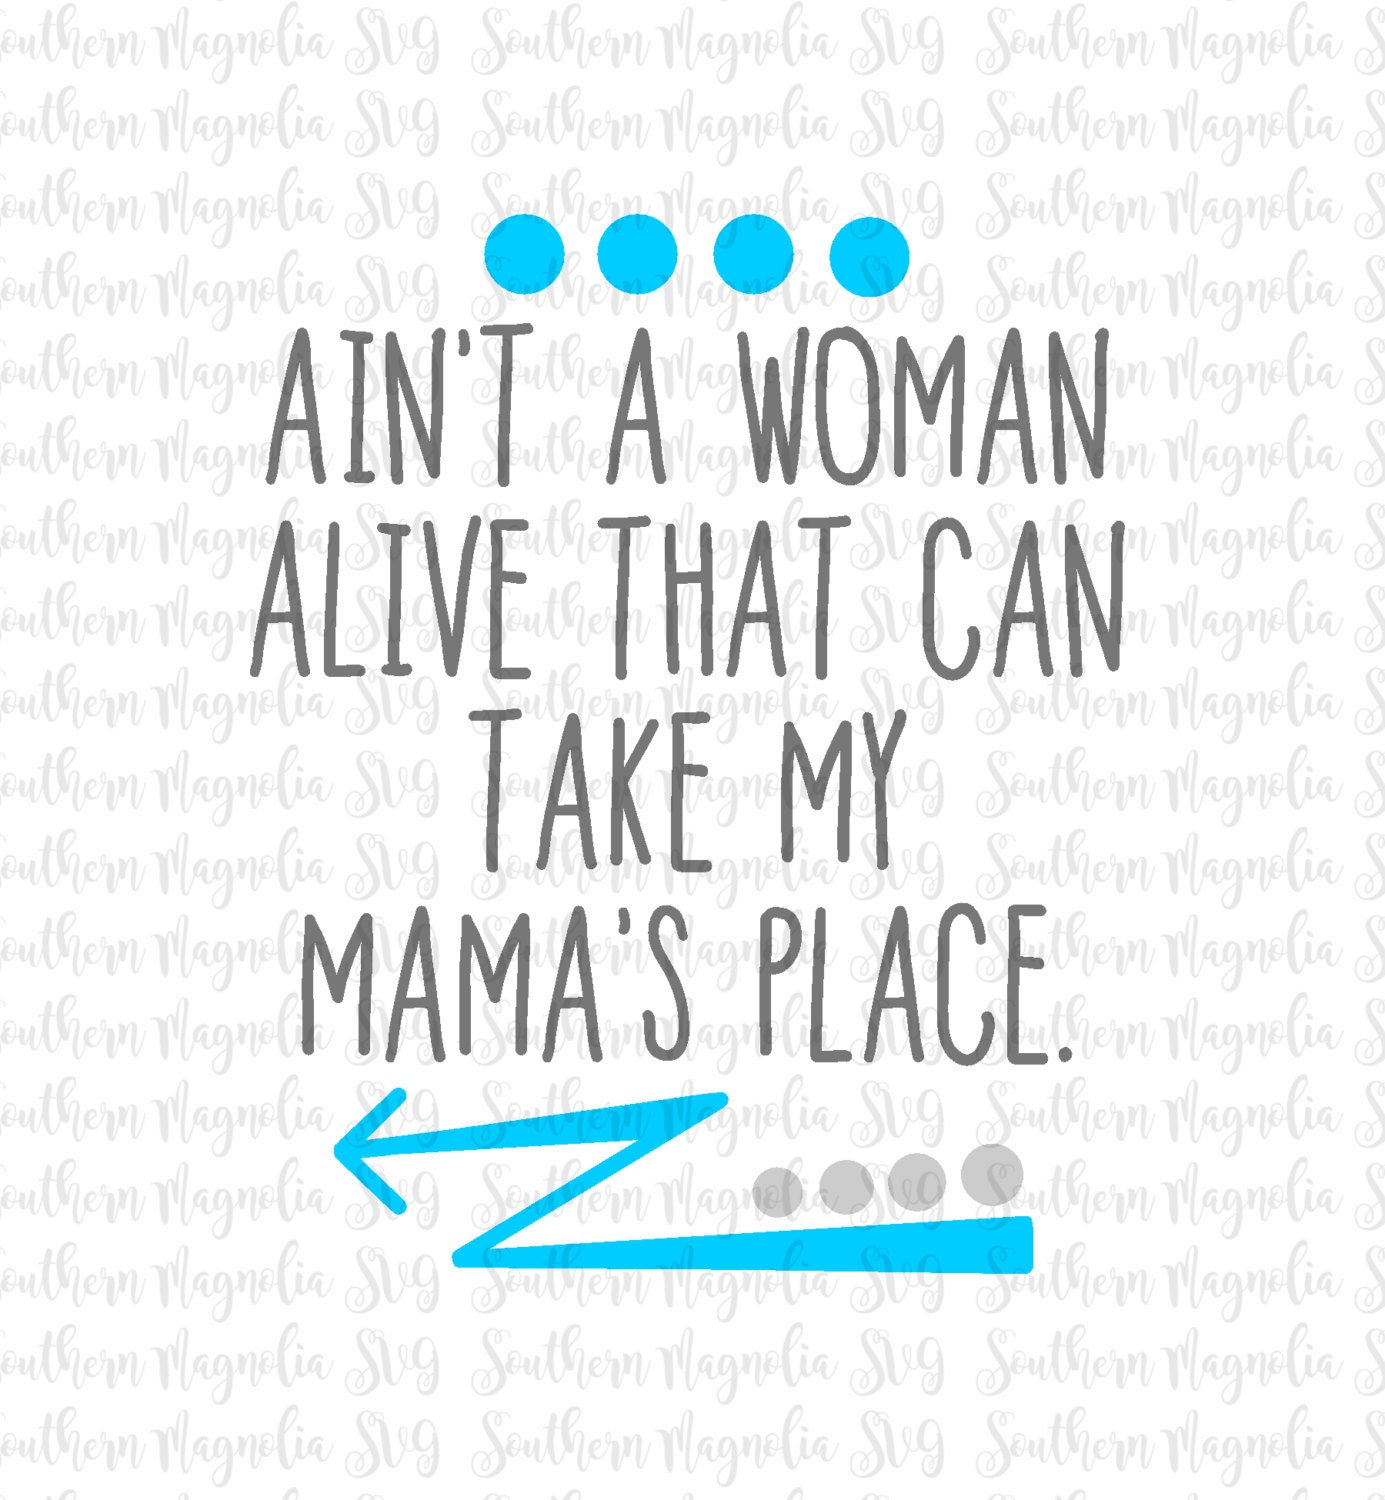 Aint a Woman Alive the Can Take My Mamas Place Tupac